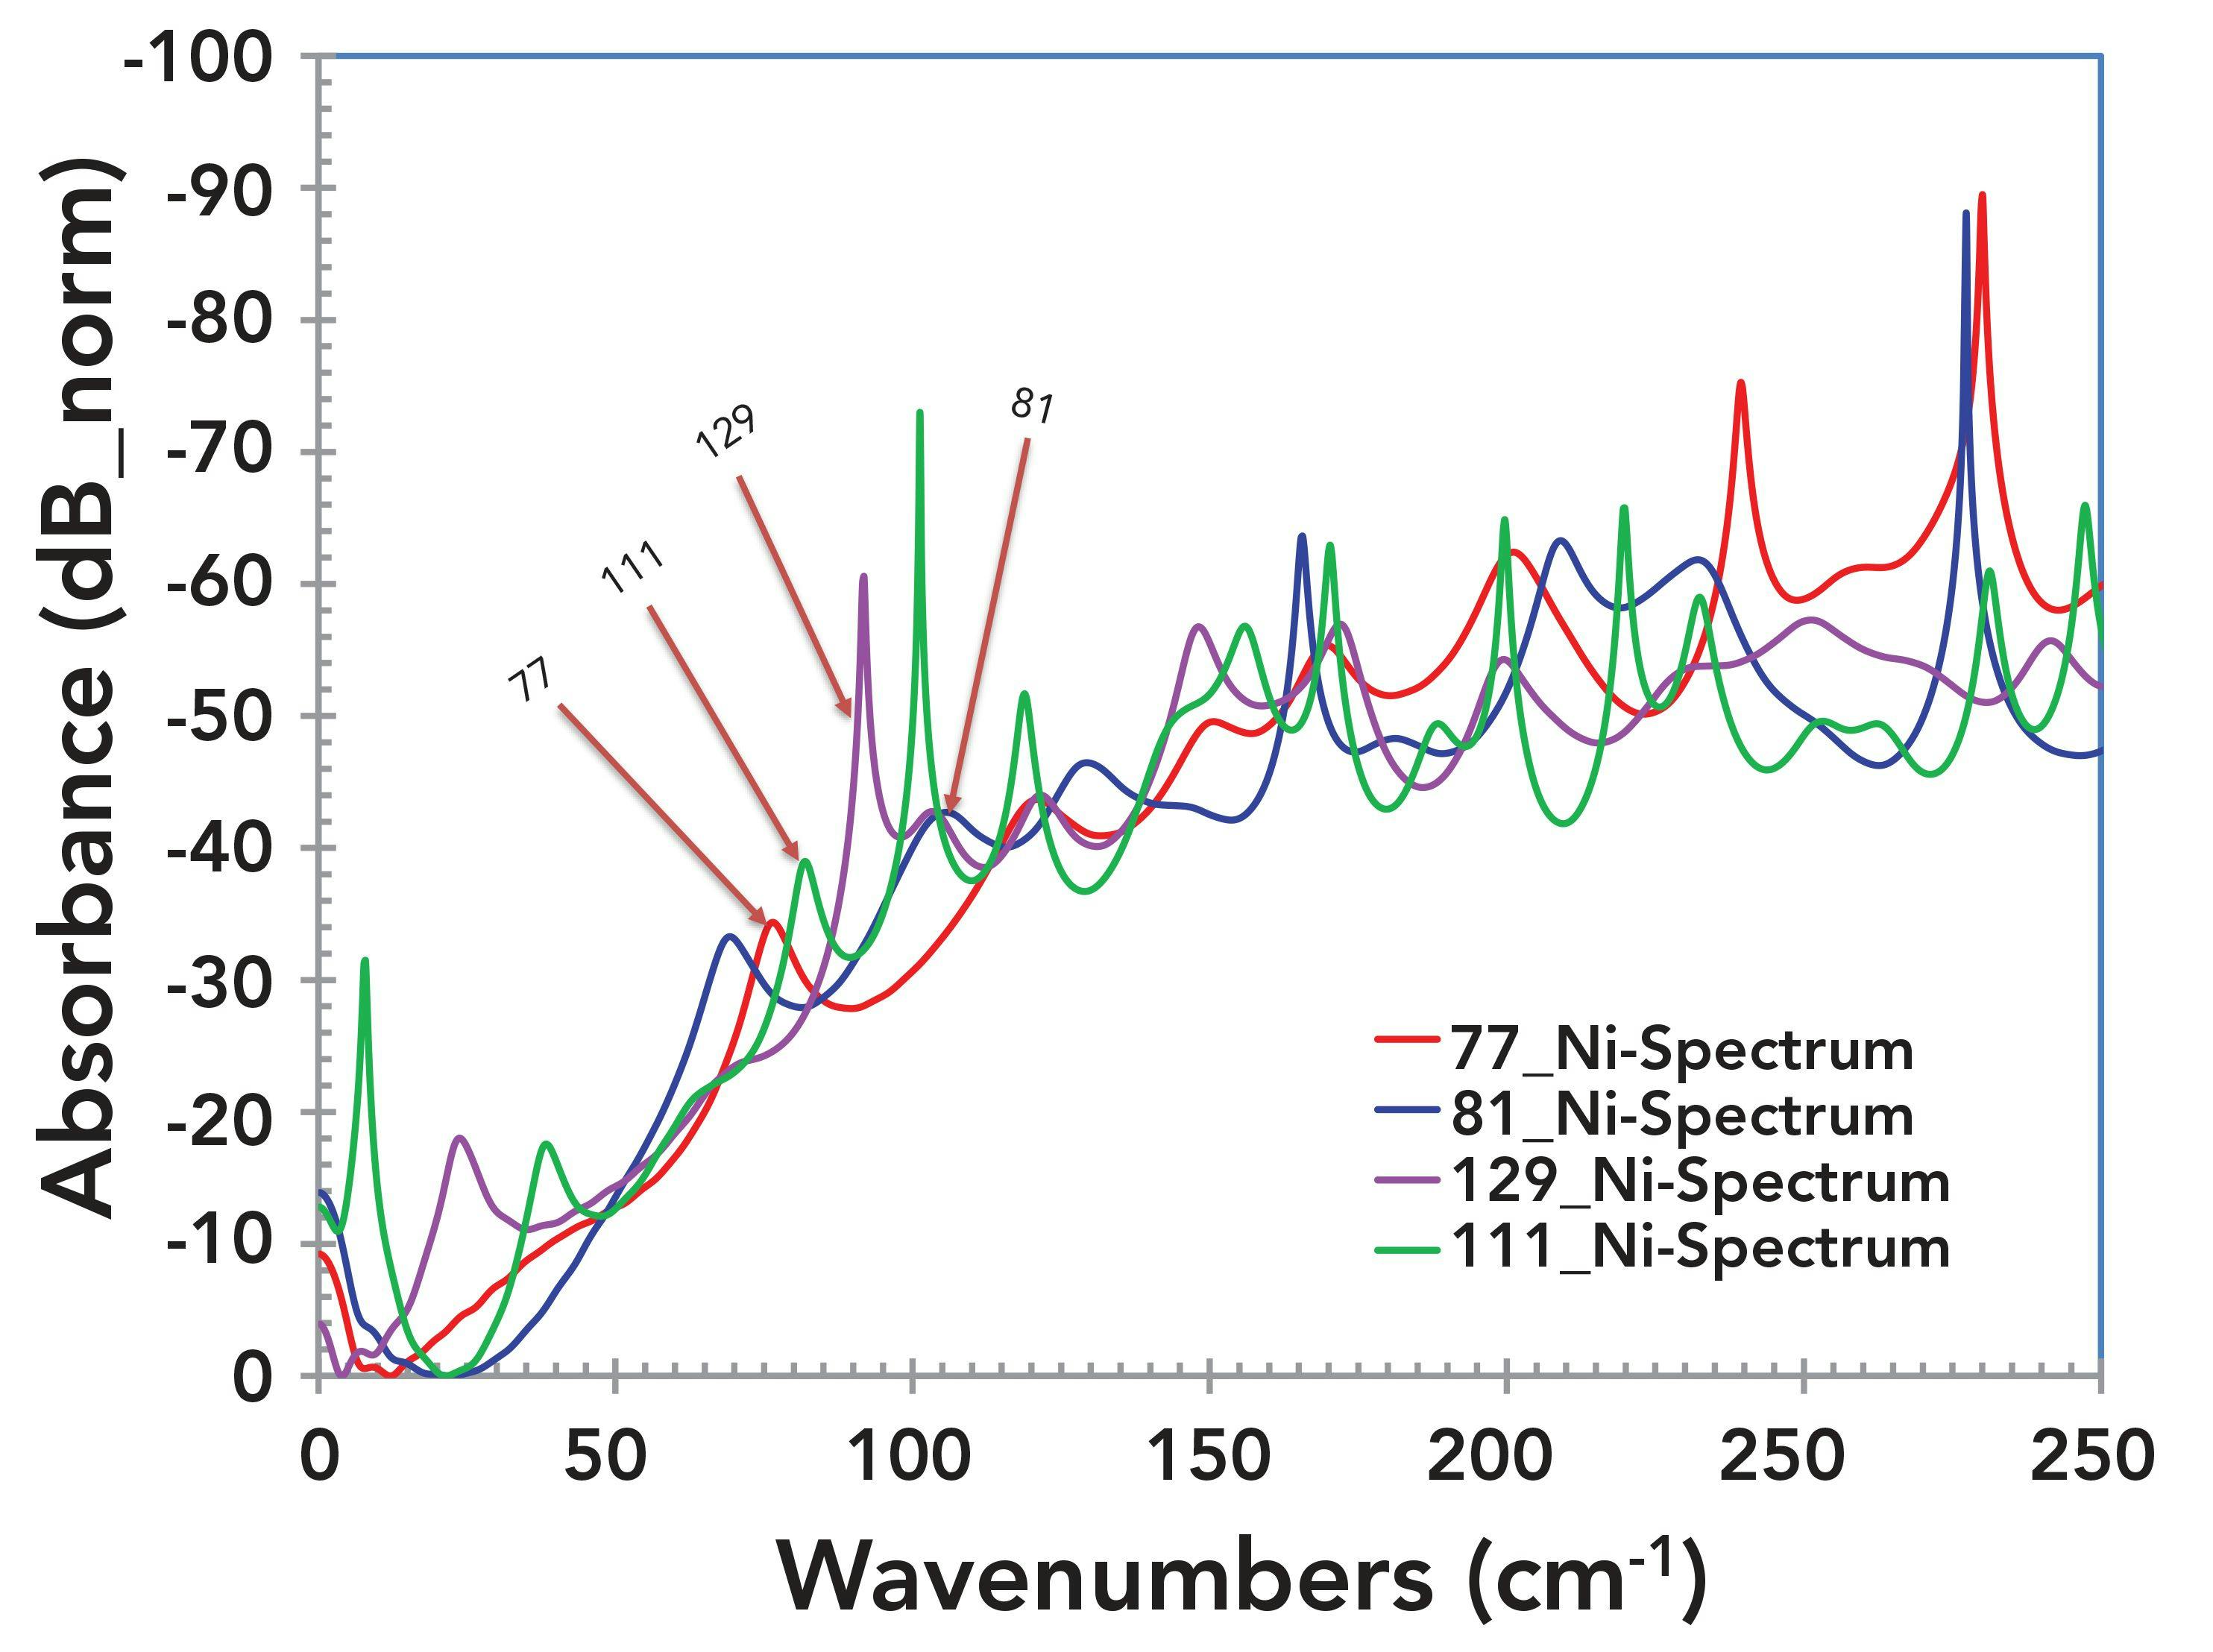 FIGURE 8: Enlarged of Figure 7. Absorbance spectra of four samples from the nickel rich area from 1 cm-1 to 300 cm-1 showing shift in frequency with respect to each other. This is consistent with previous observation of the systematic lattice dilation.